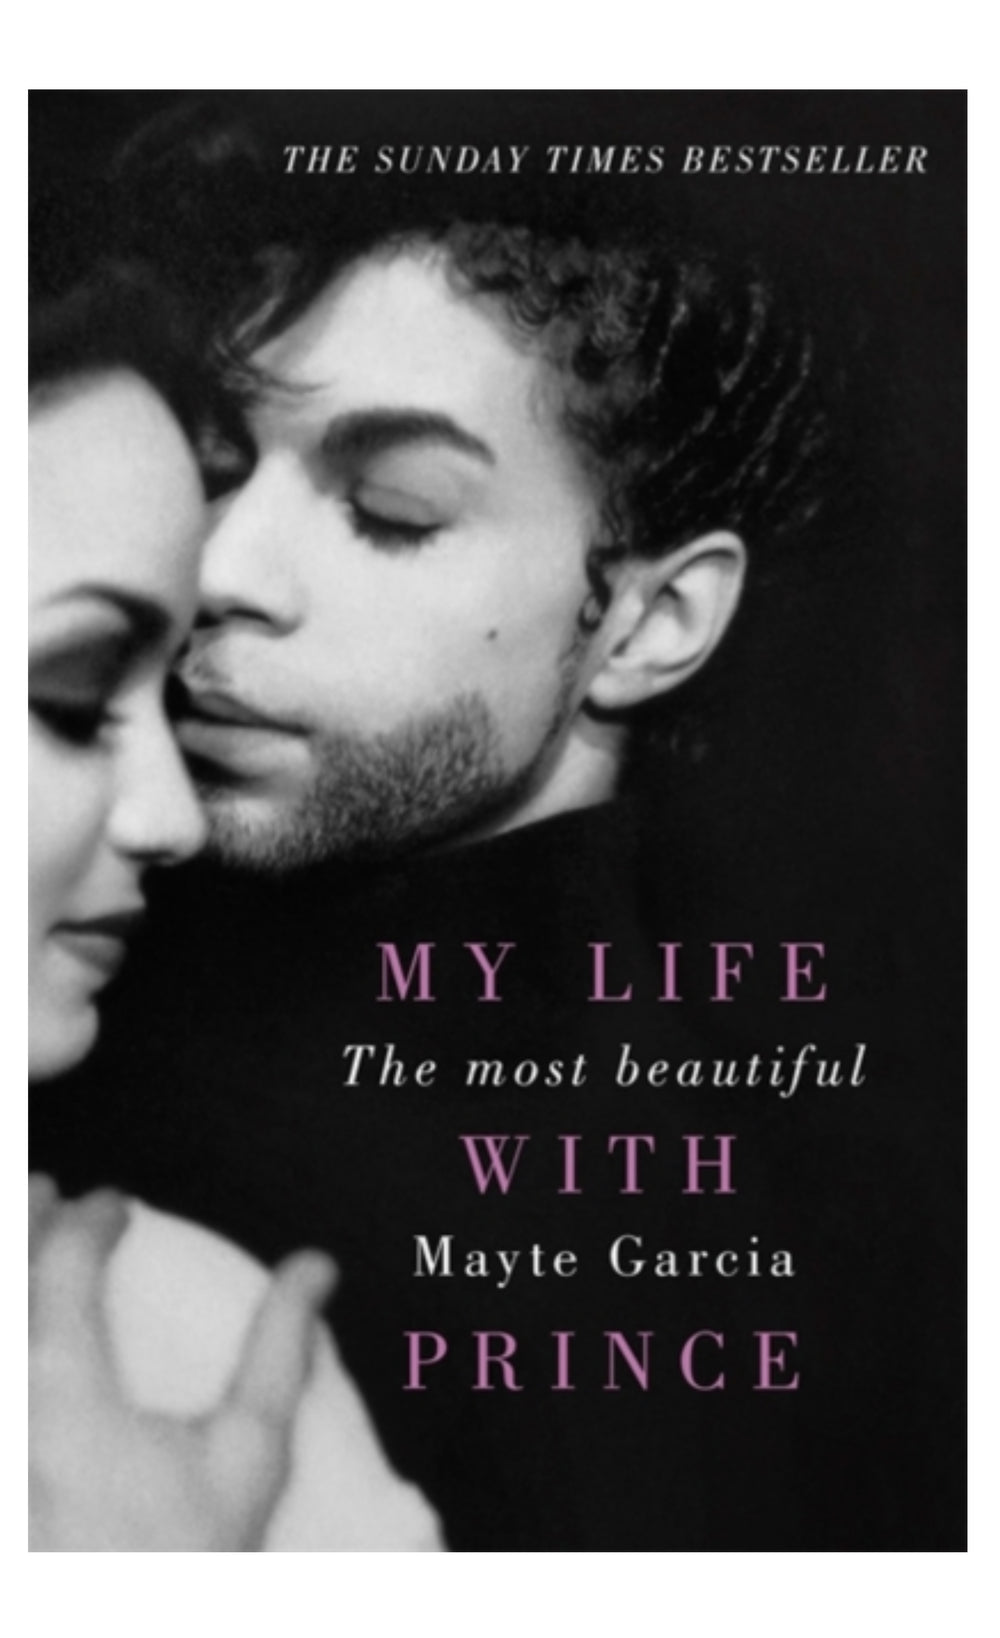 Prince – The Most Beautiful : My Life With Prince by Mayte Garcia Book HARDBACKED